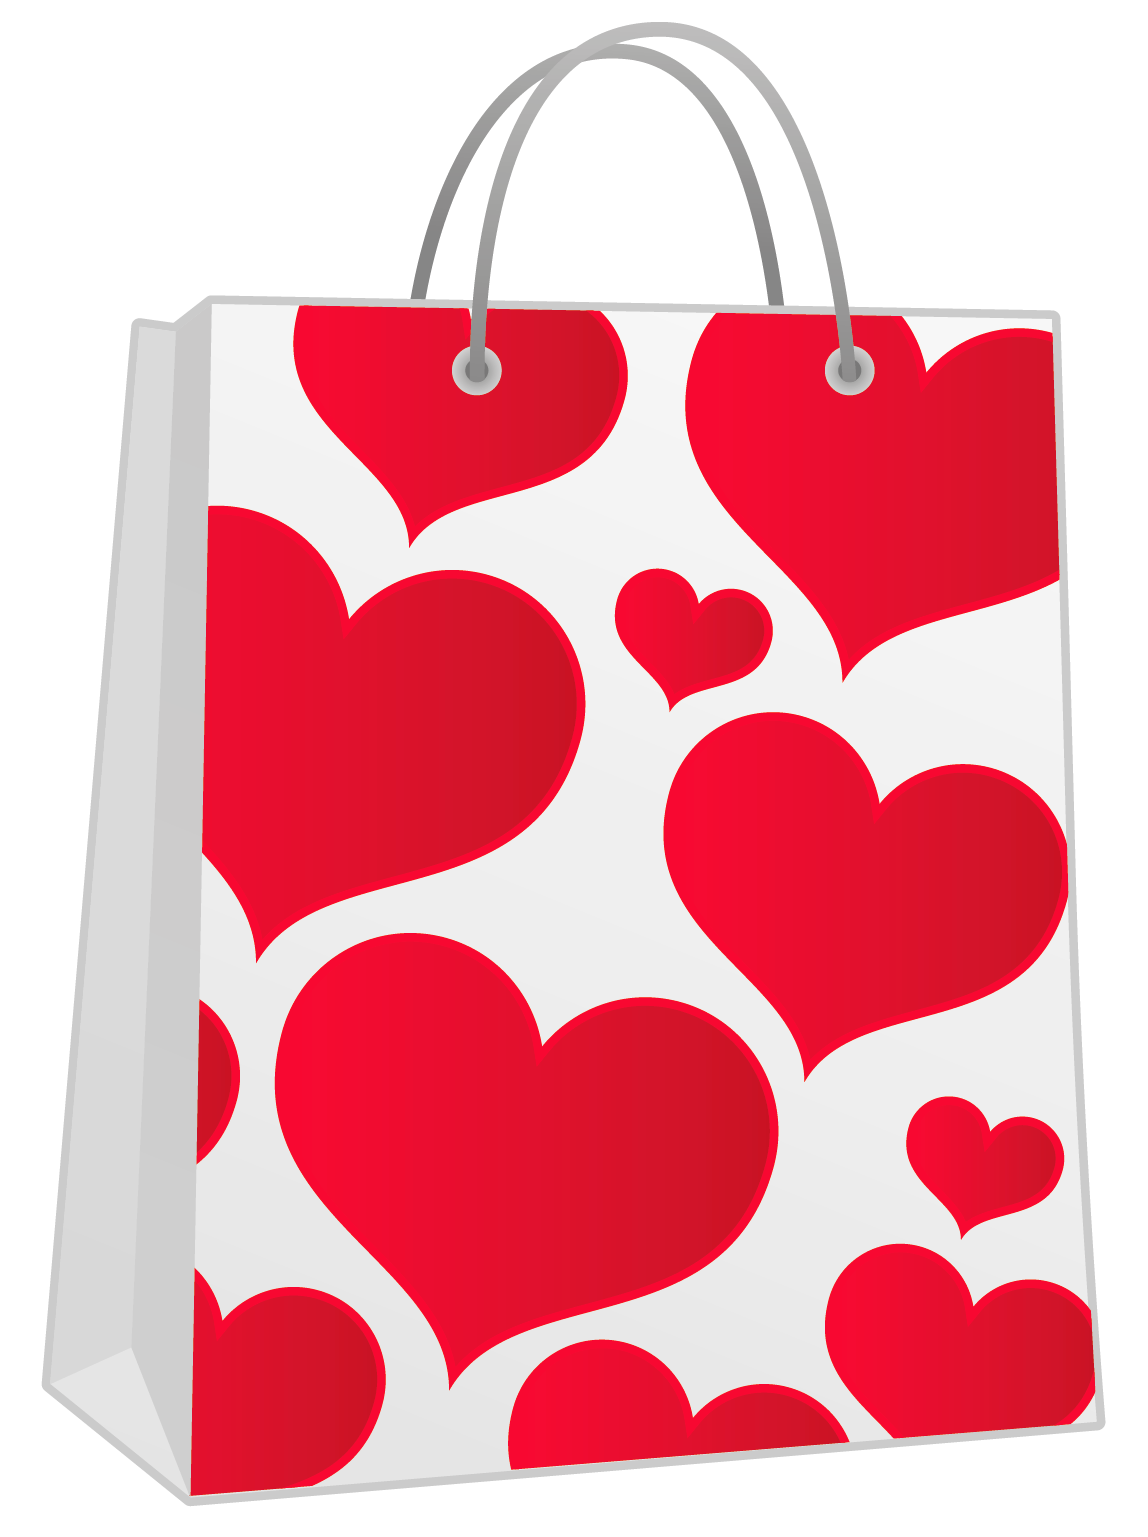 Decorative Gift Bag Red PNG Clipart​  Gallery Yopriceville - High-Quality  Free Images and Transparent PNG Clipart